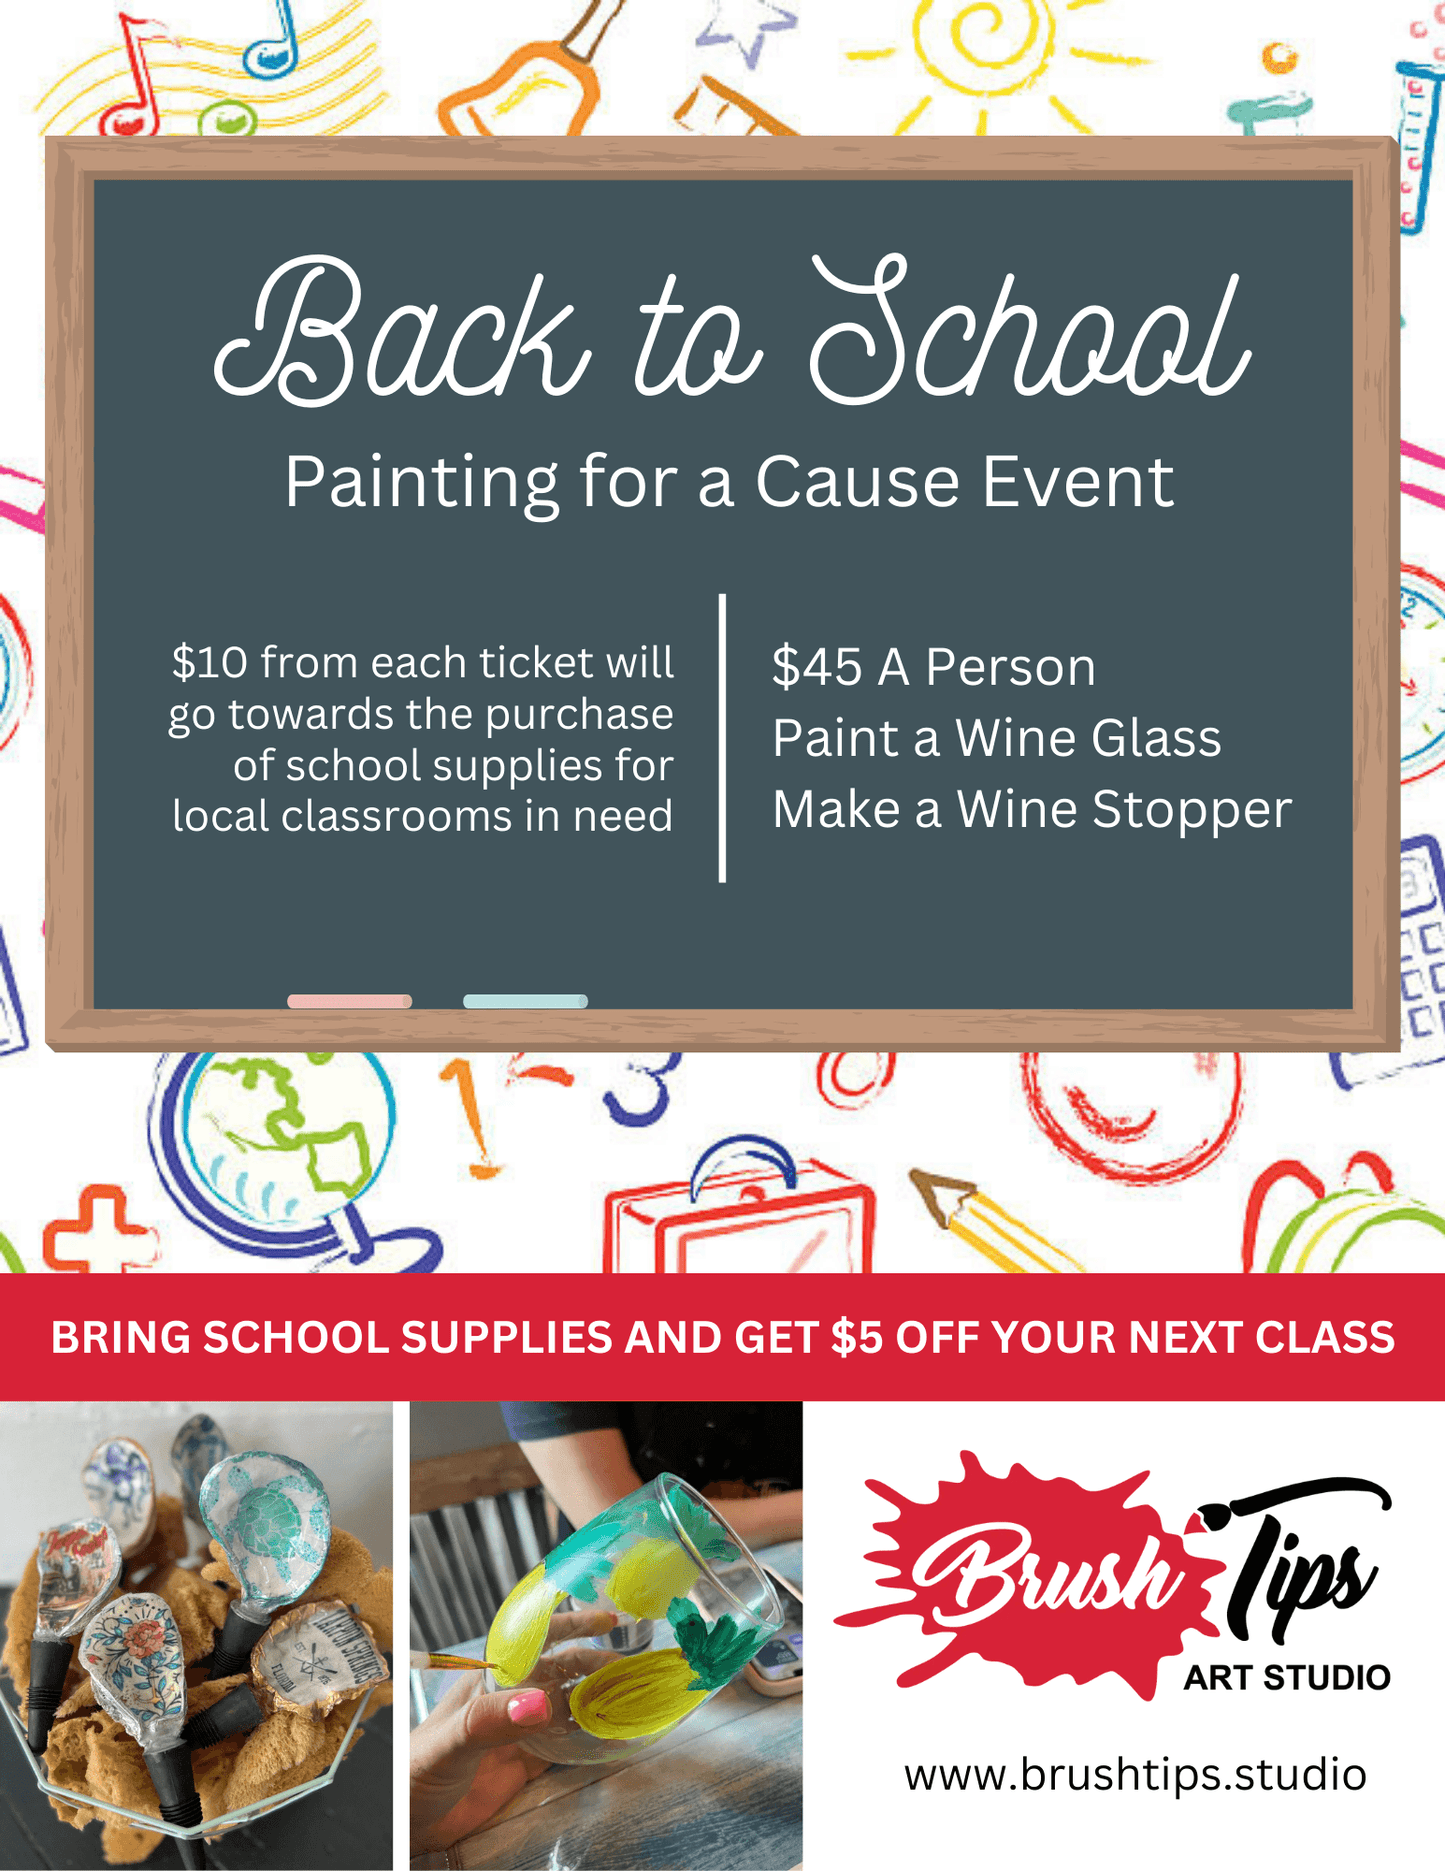 Back to School - Painting for a Cause